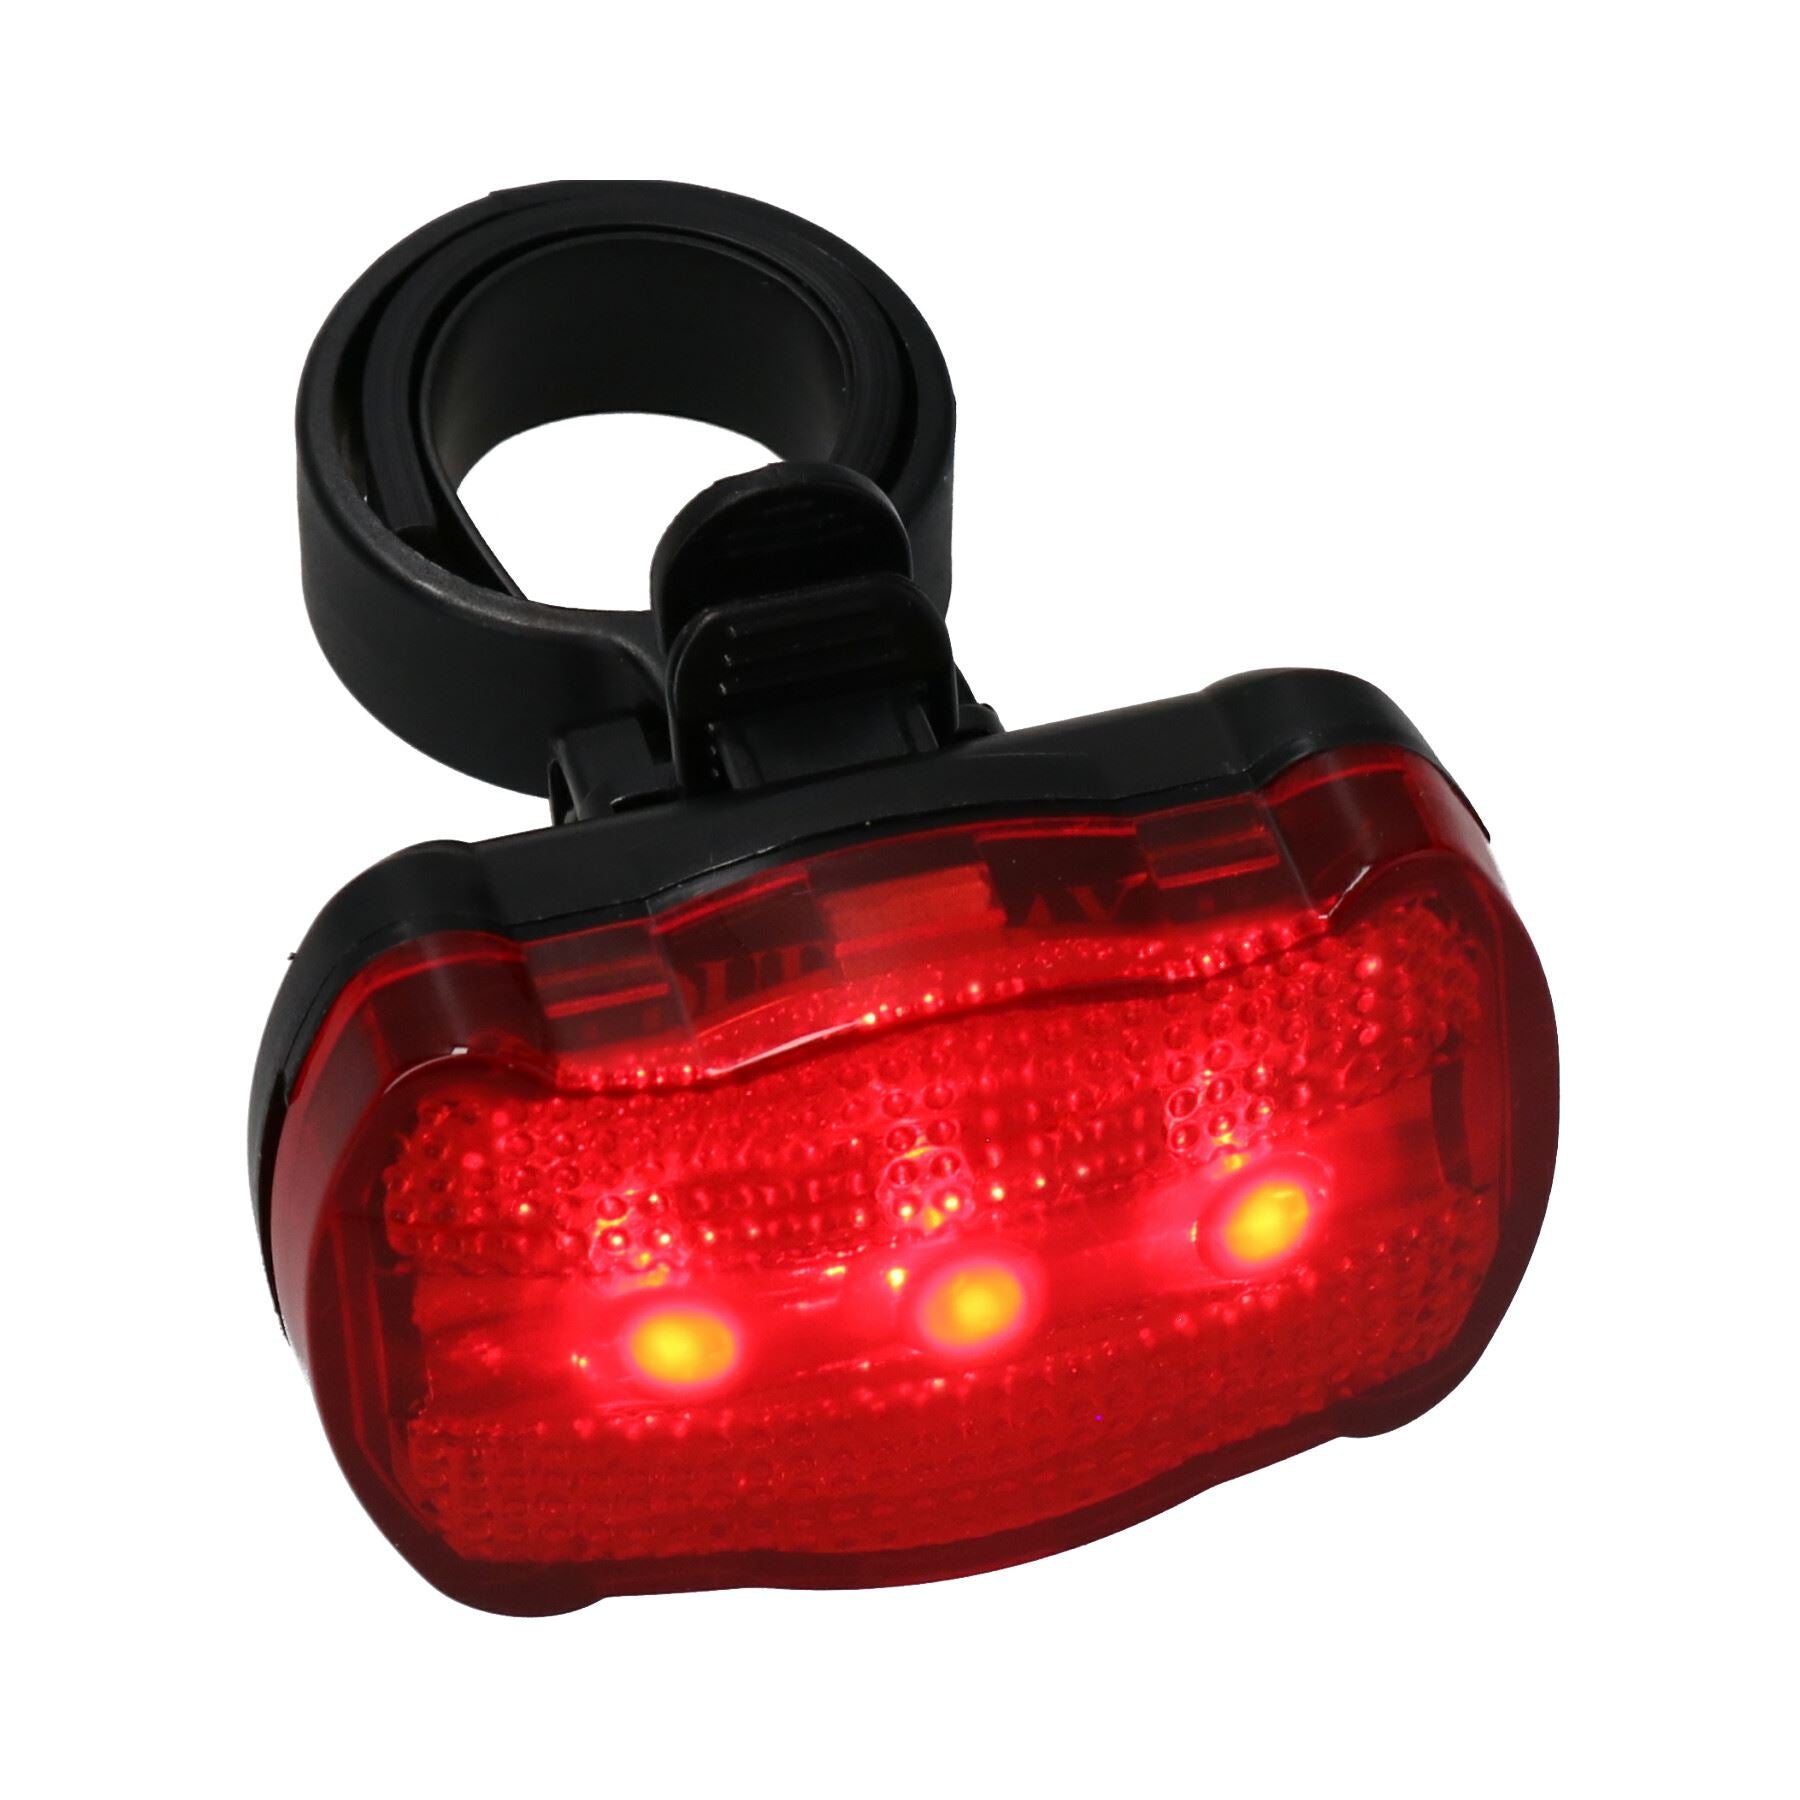 Bike Cycle Commuter Bright Beam Light LED Front & Rear With Mounting Bracket